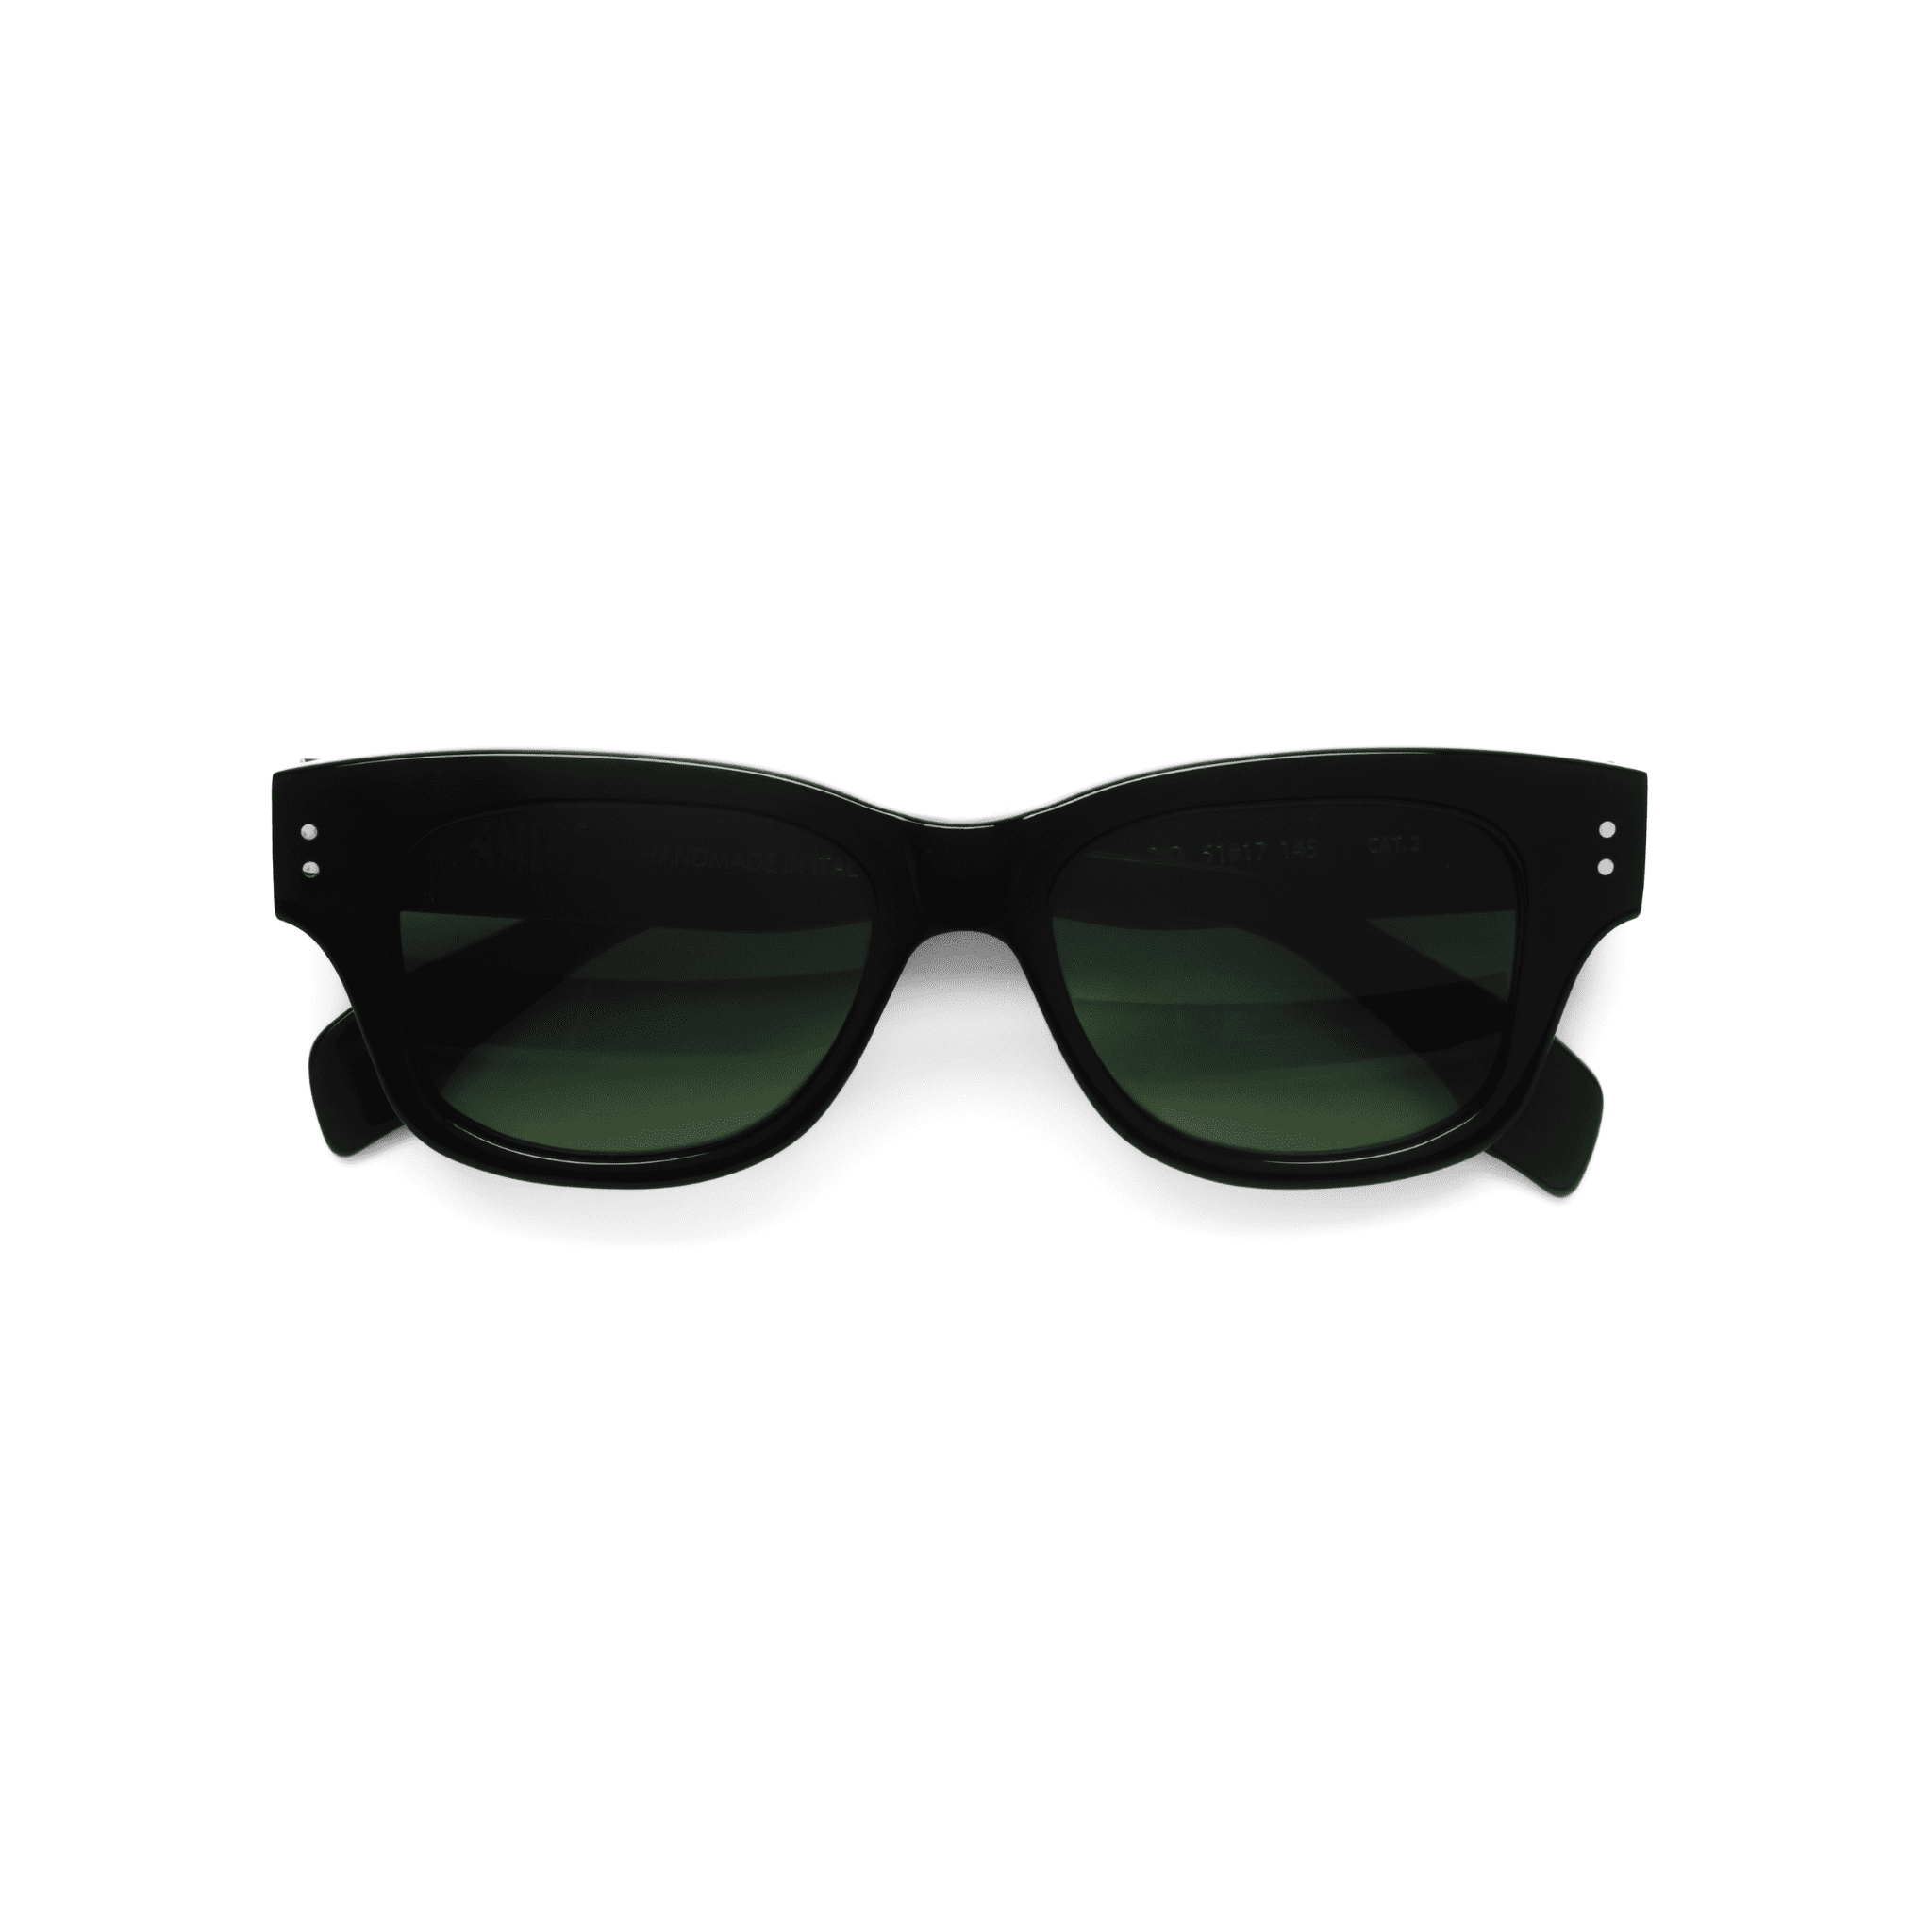 Ameos Forever collection Rio model. Black frames with dark green lenses. Front view temples crossed. Genderless, gender neutral eyewear